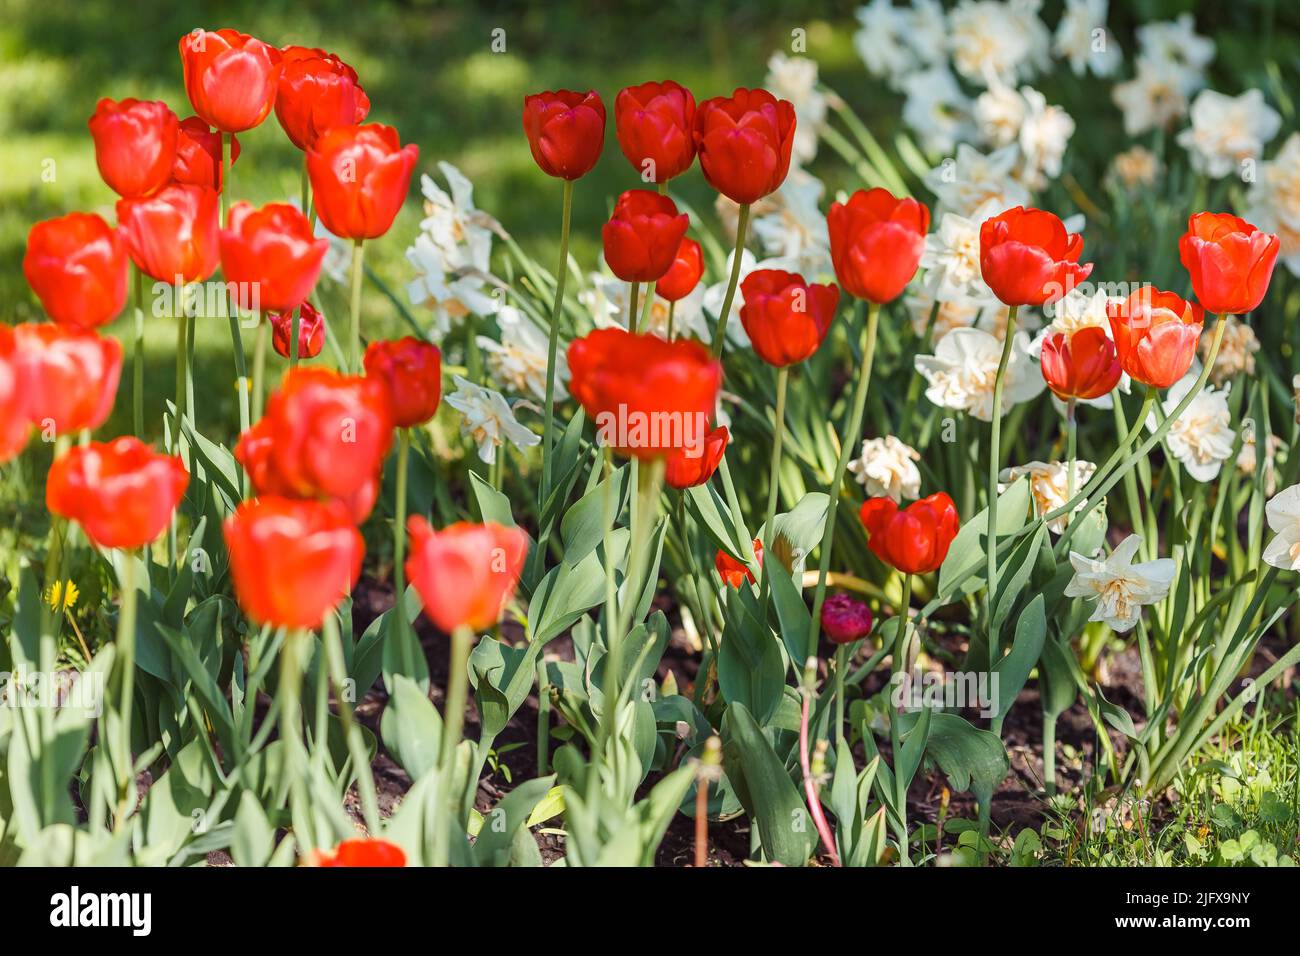 Flowerbed with open red and white daffodils in the park Stock Photo